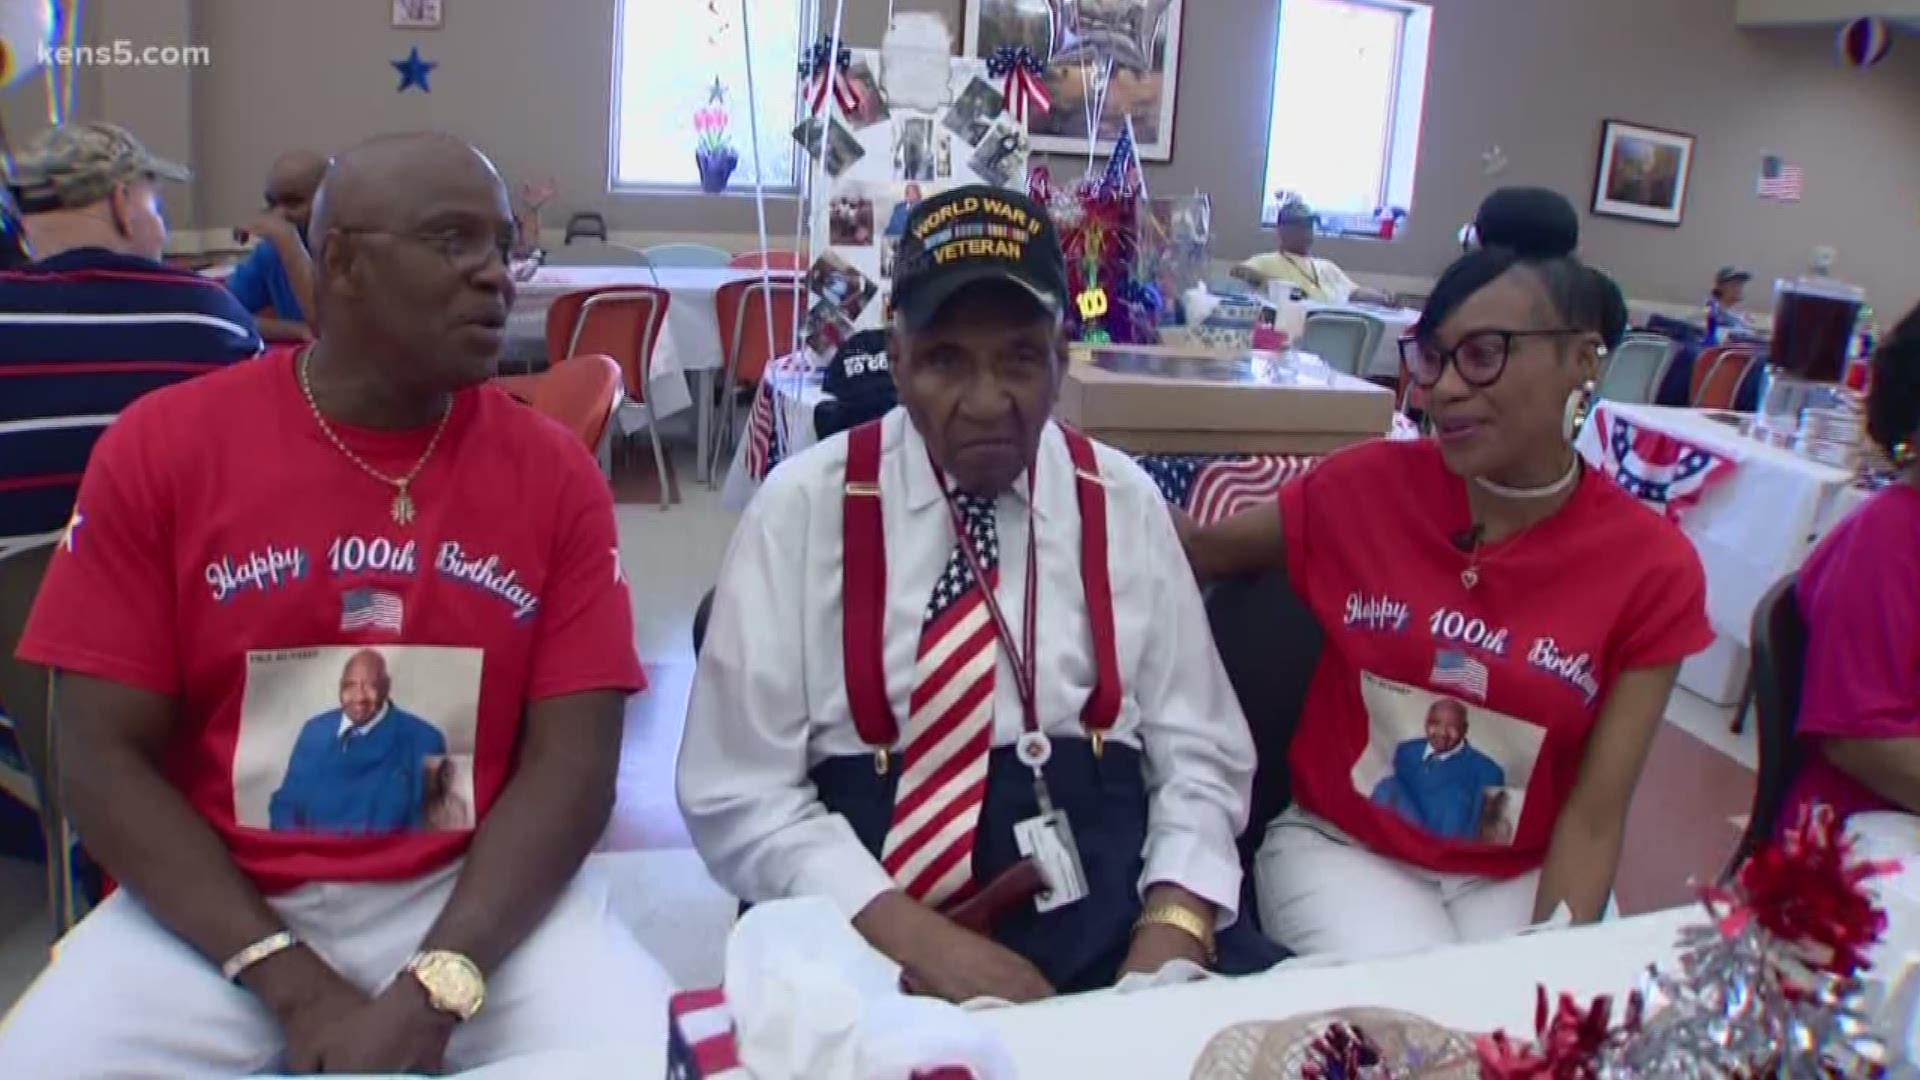 World War II veteran Marion Runnels was surrounded by friends at his 100th birthday party at a senior center in San Antonio.